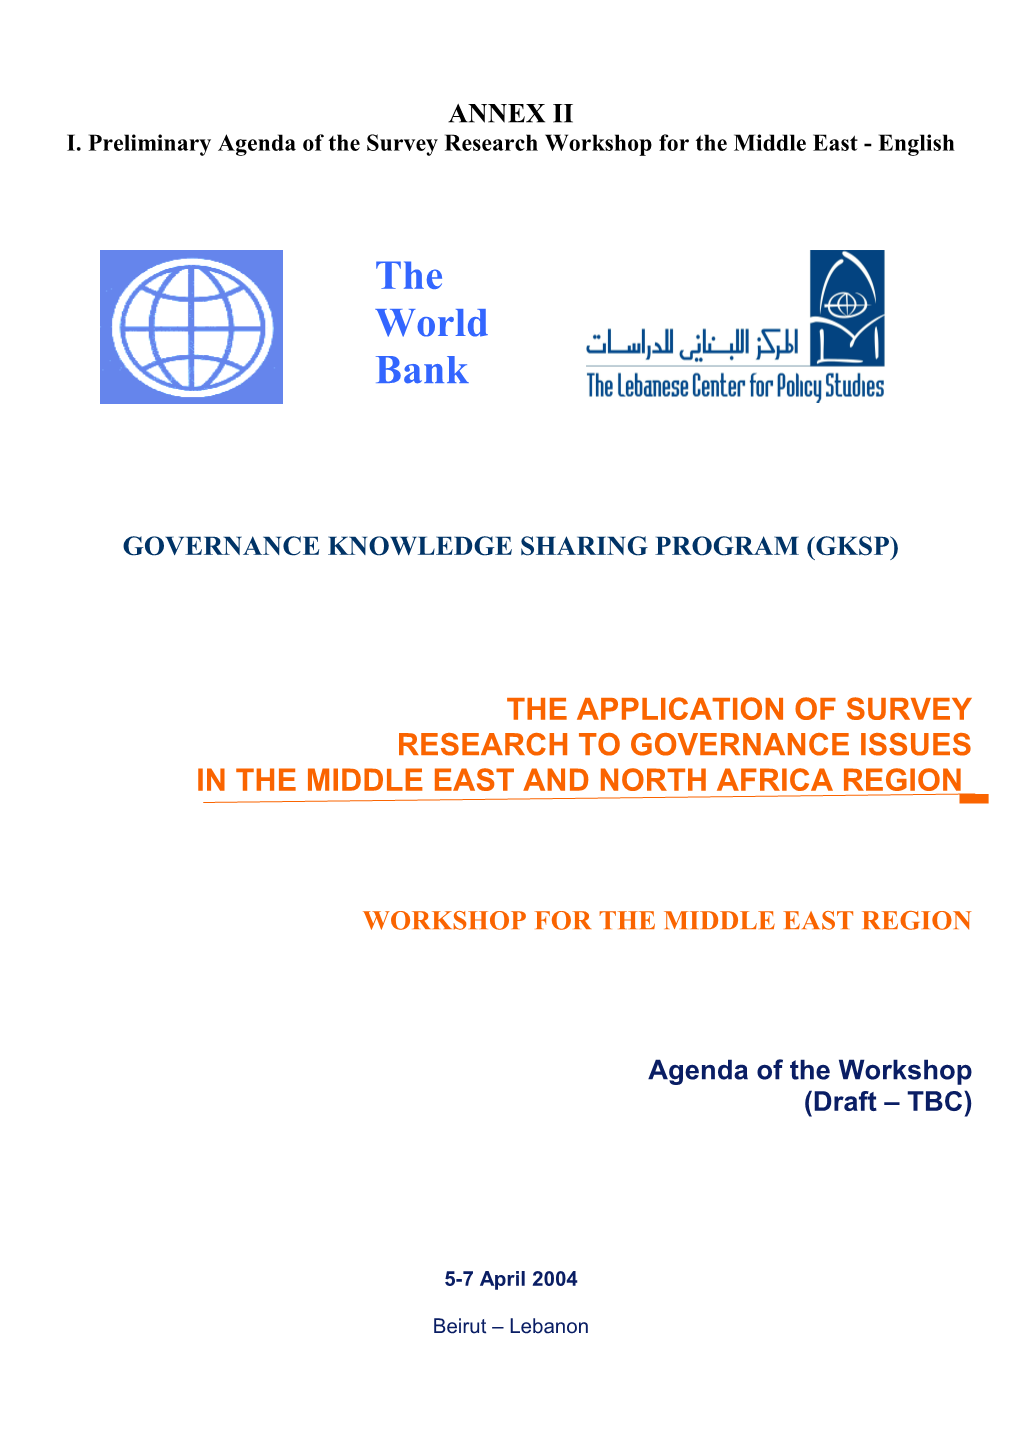 I. Preliminary Agenda of the Survey Research Workshop for the Middle East - English